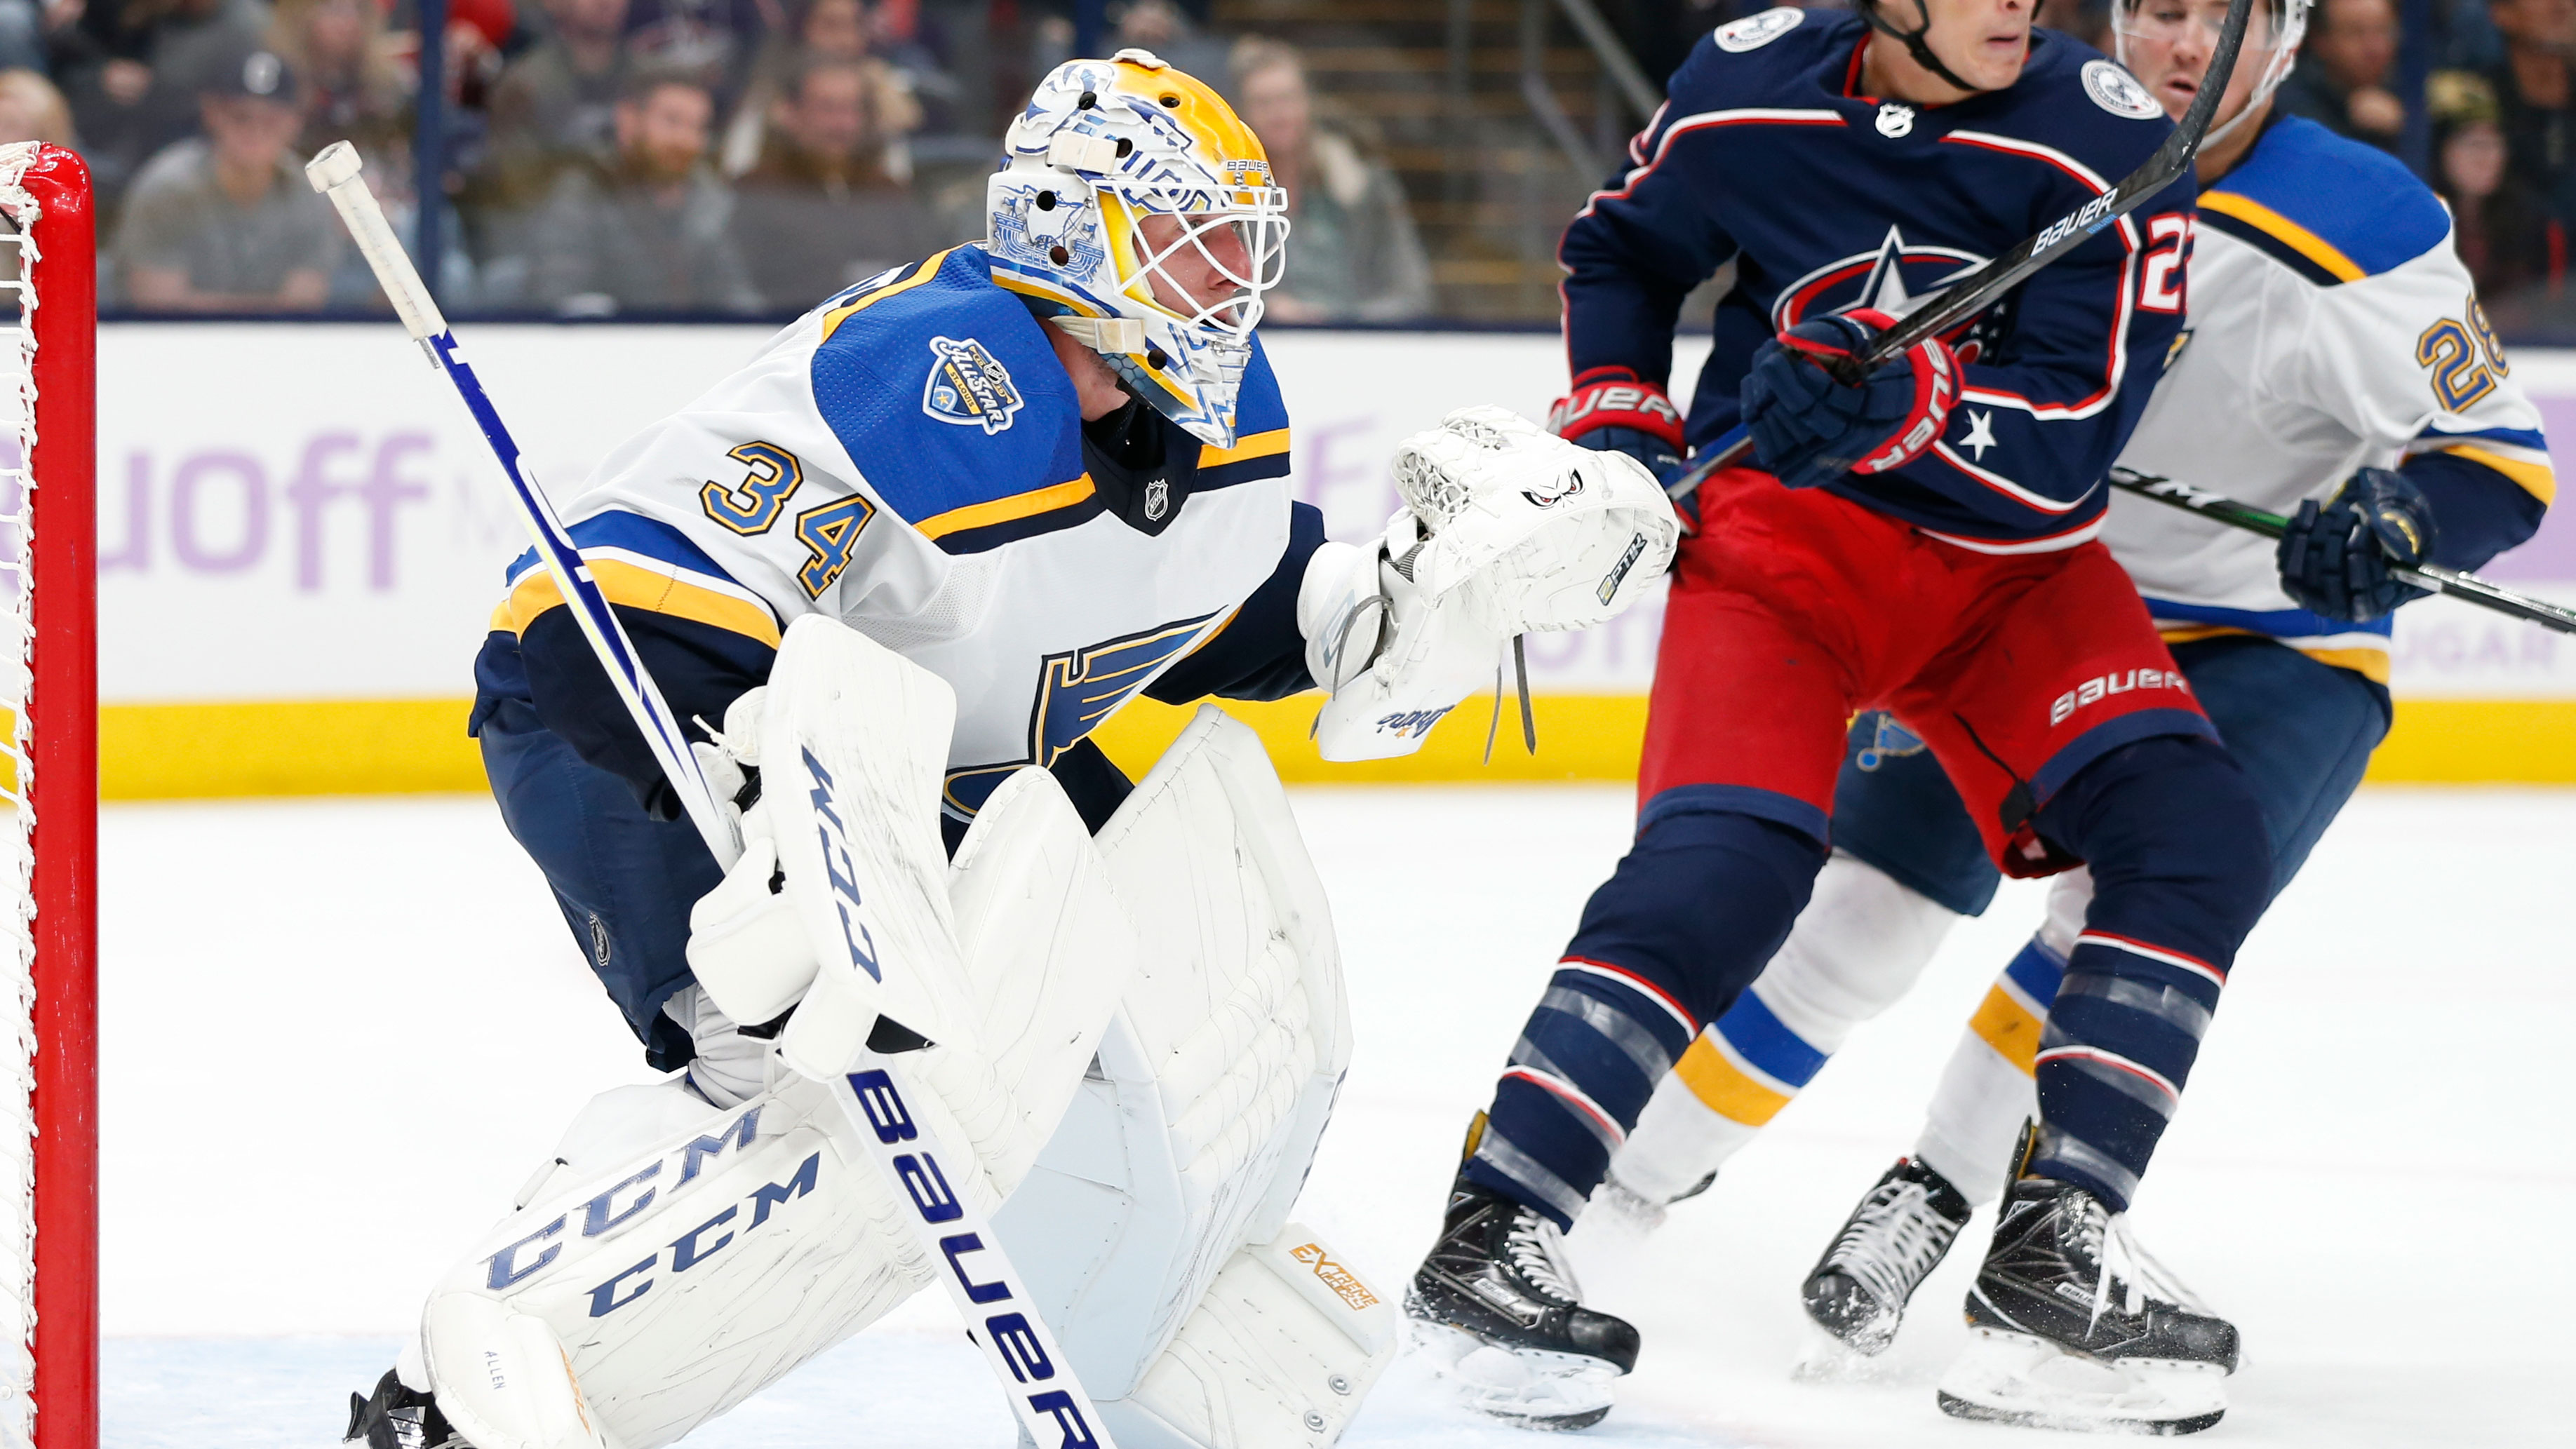 Blues drop second straight in OT, 3-2 to Blue Jackets